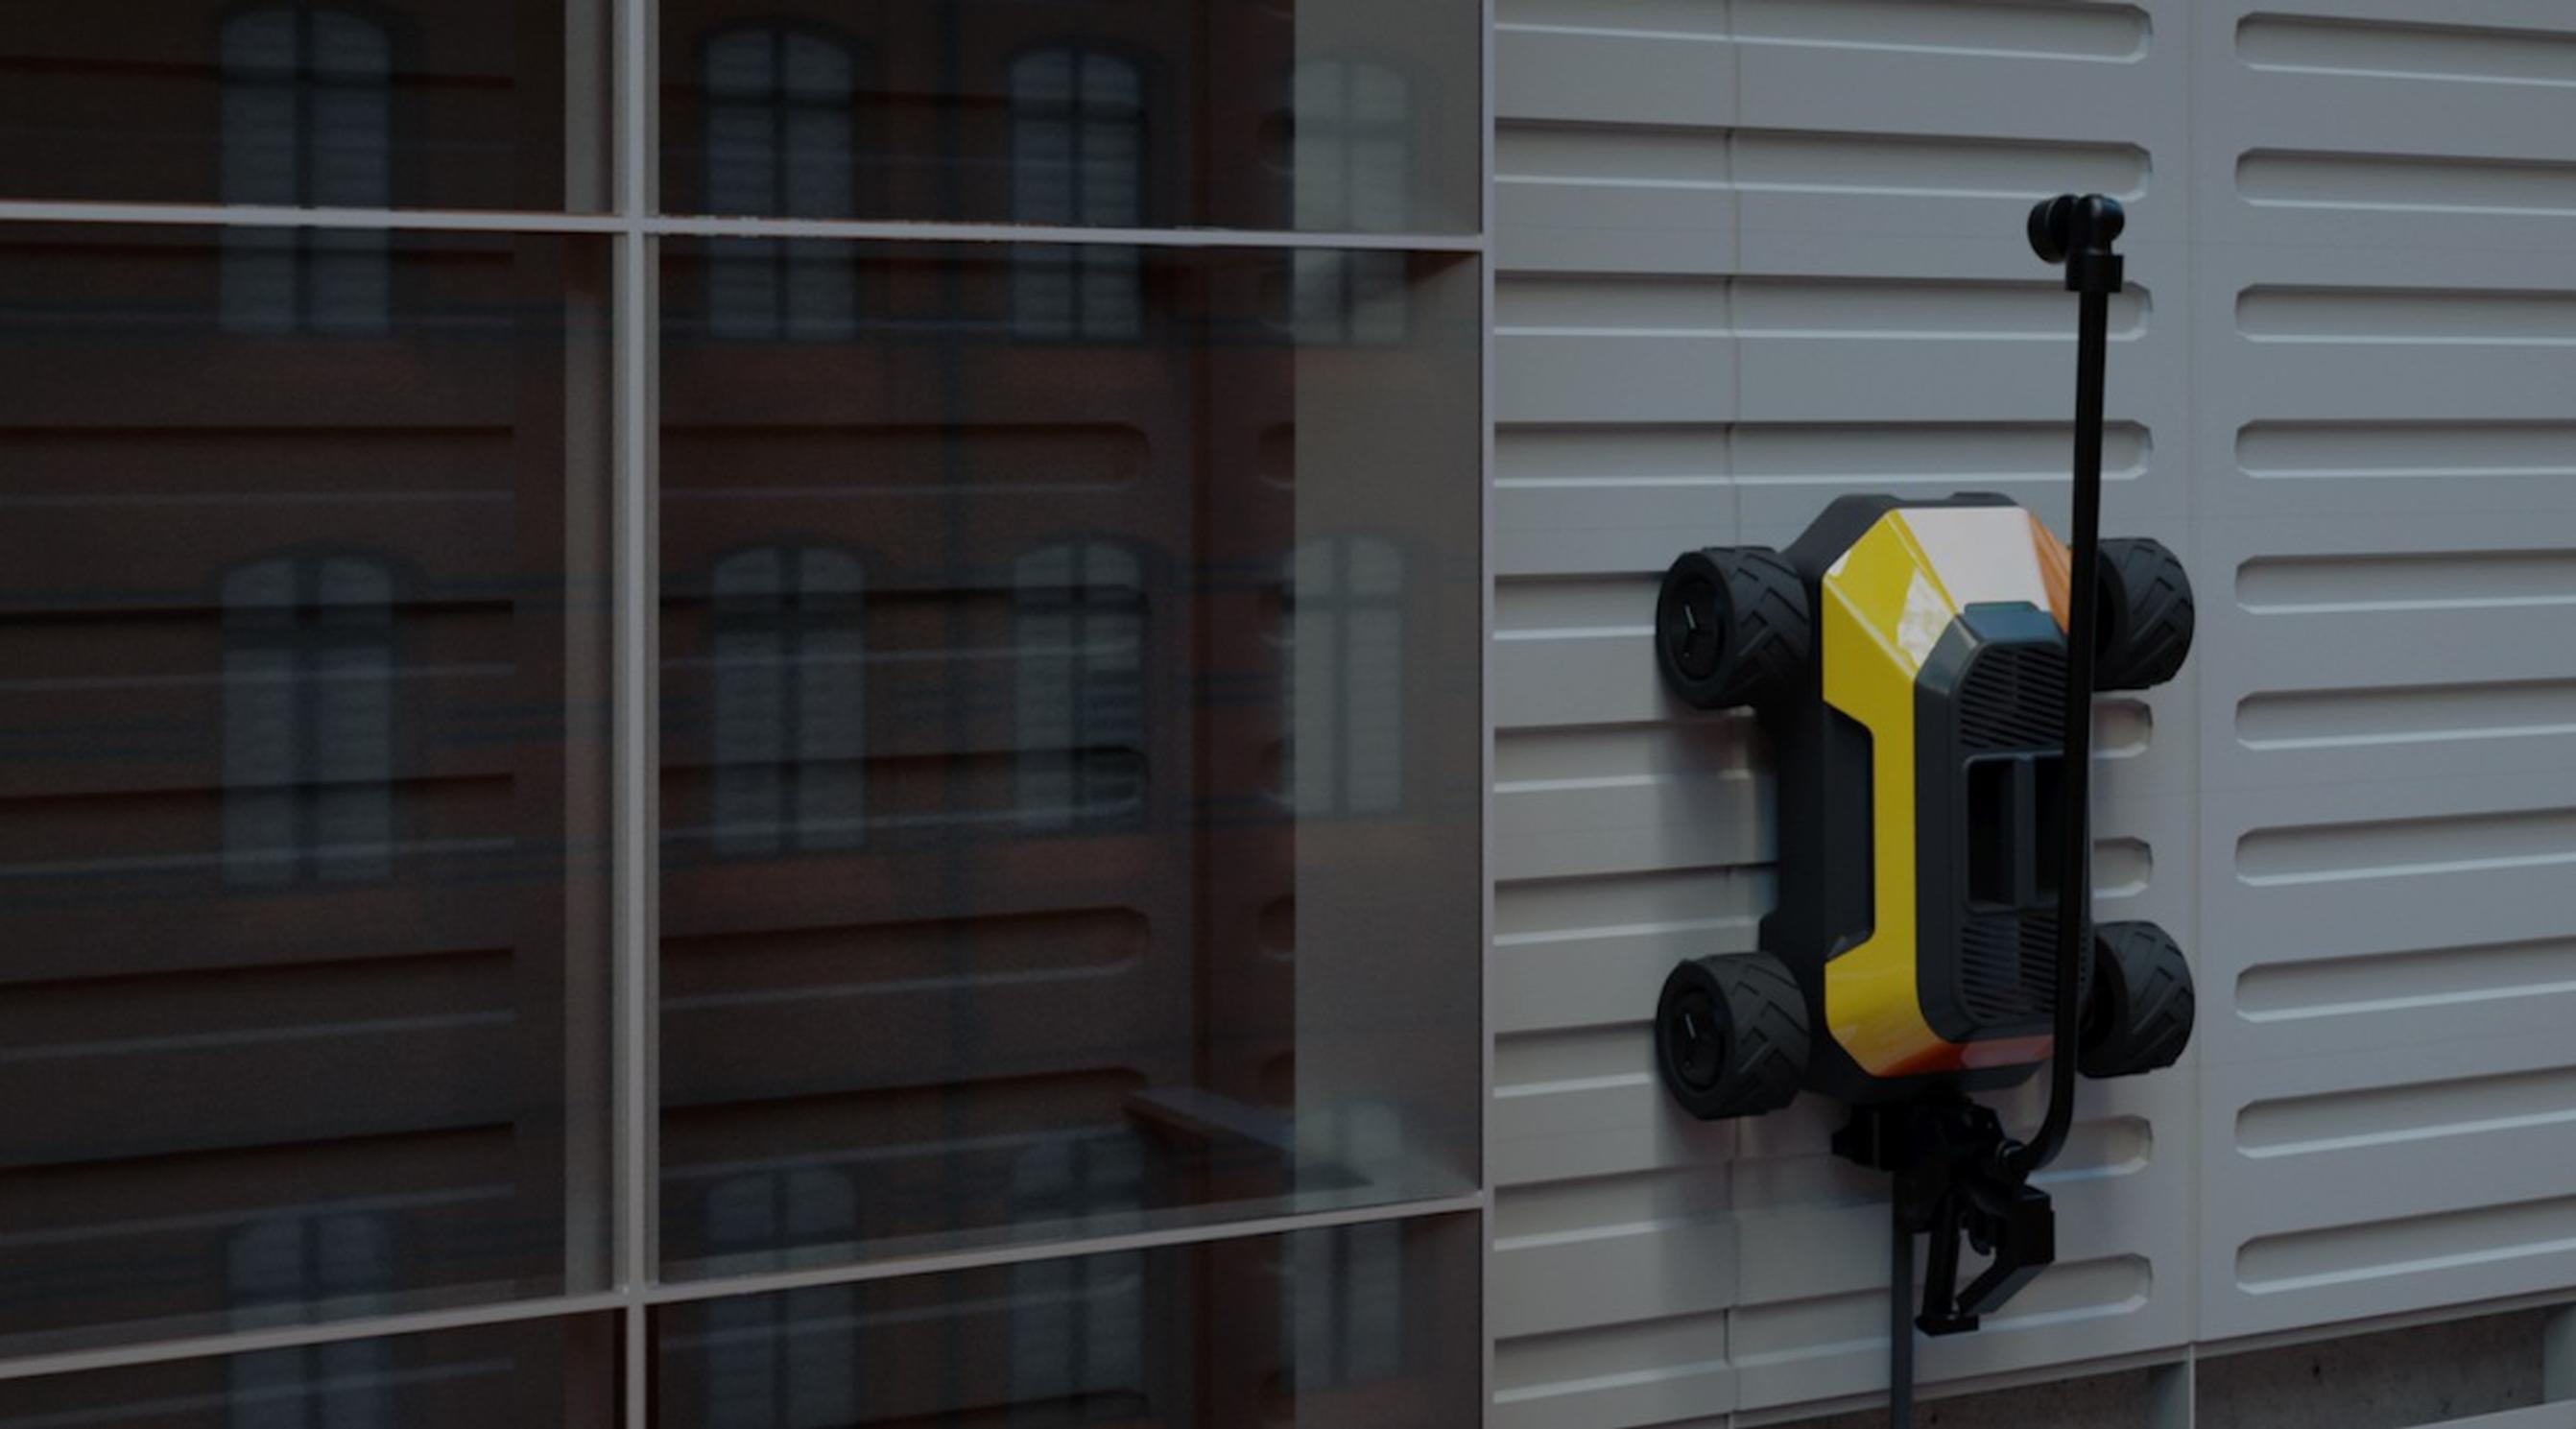 The HausBots wall-climbing robot which can apply graffiti-preventative paints